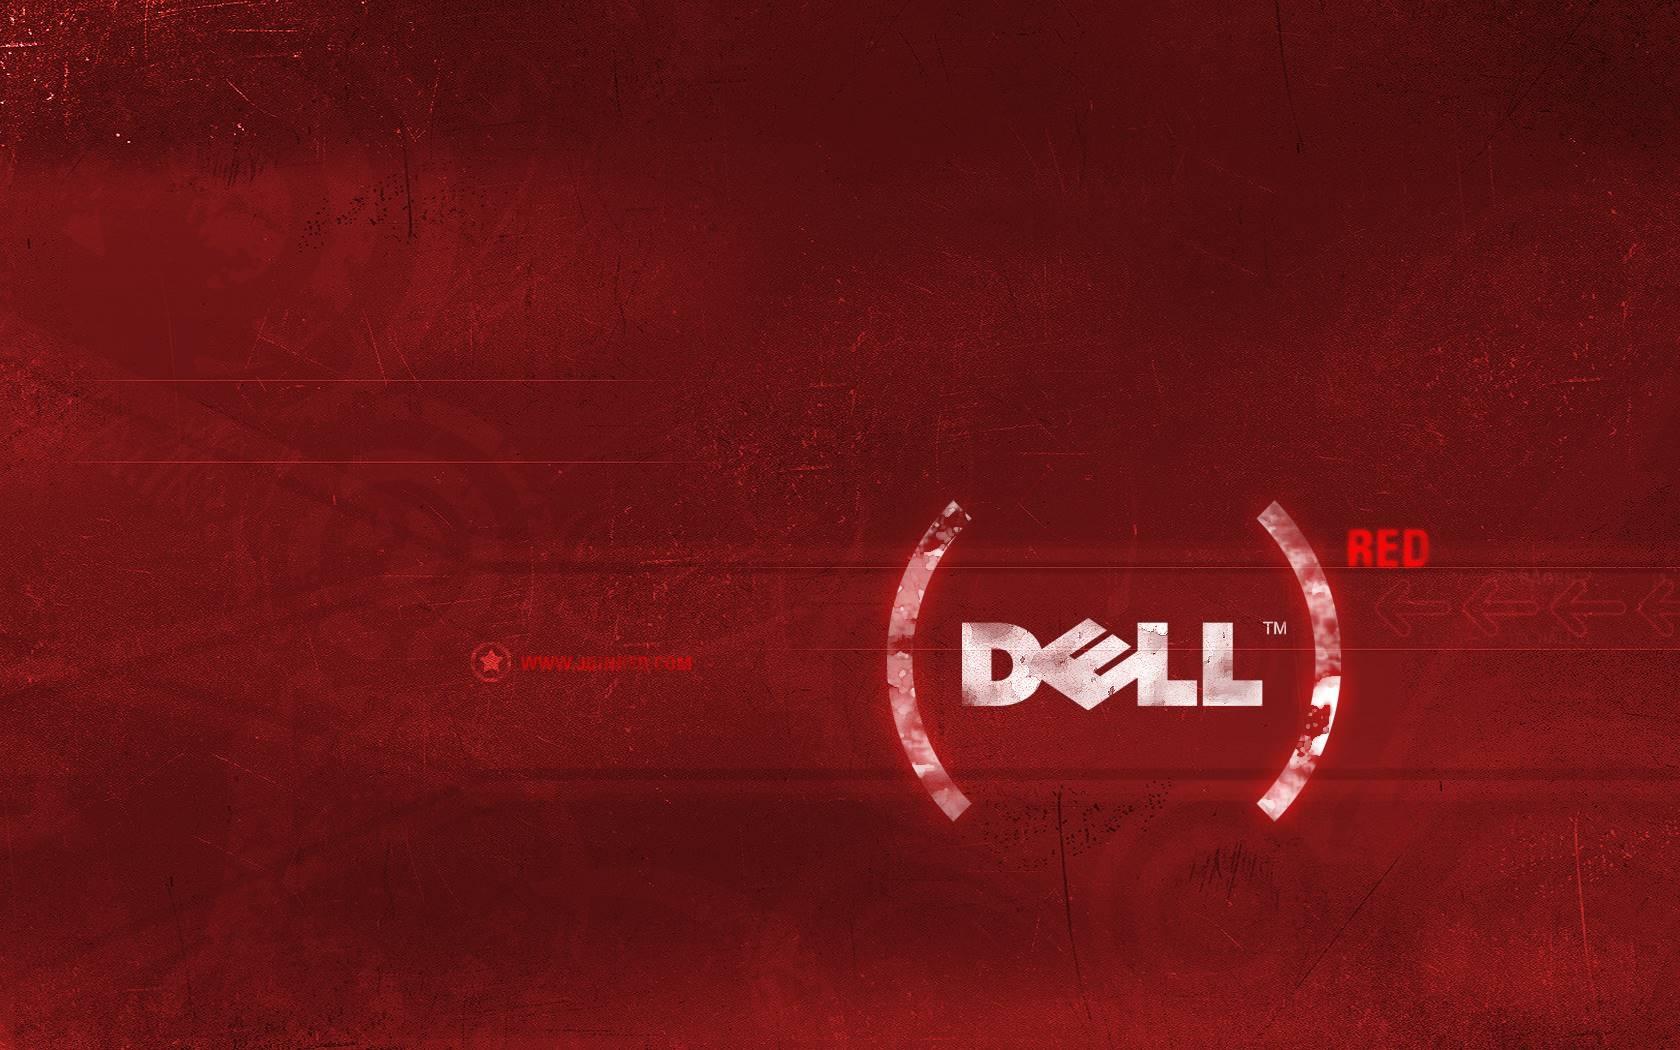 product wallpaper,red,text,maroon,font,logo